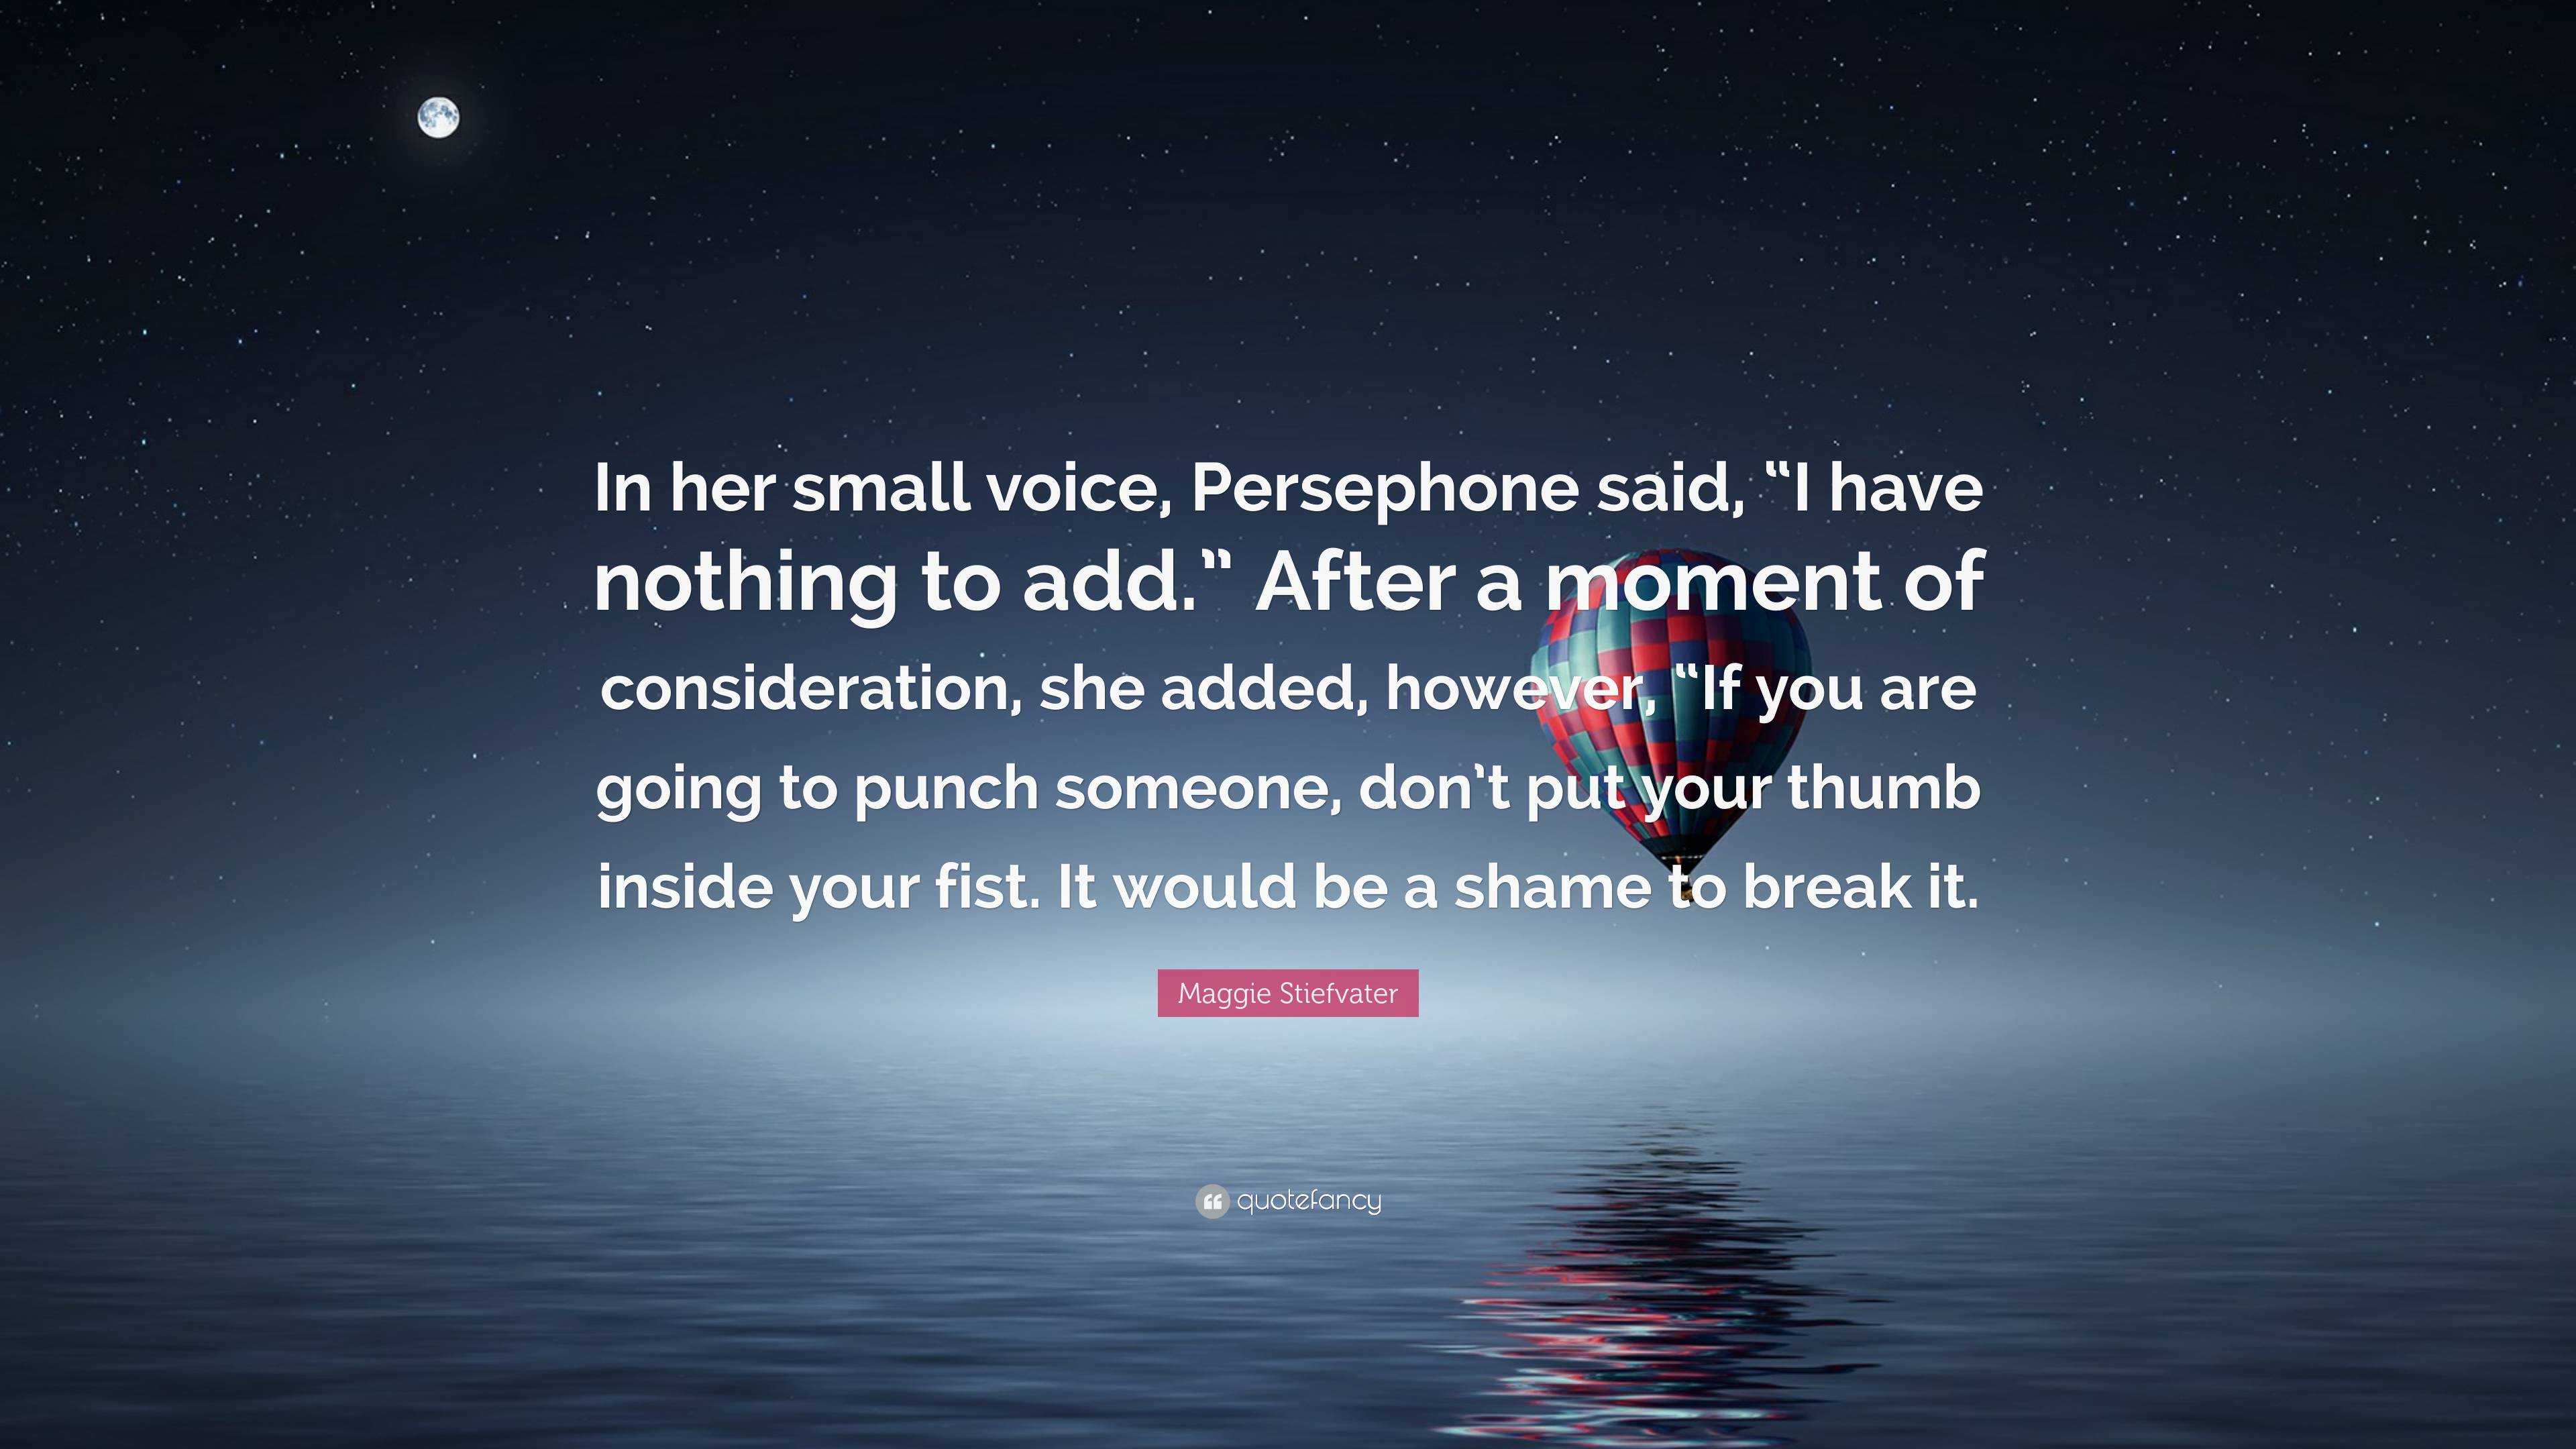 Maggie Stiefvater Quote “in Her Small Voice Persephone Said “i Have Nothing To Add” After A 